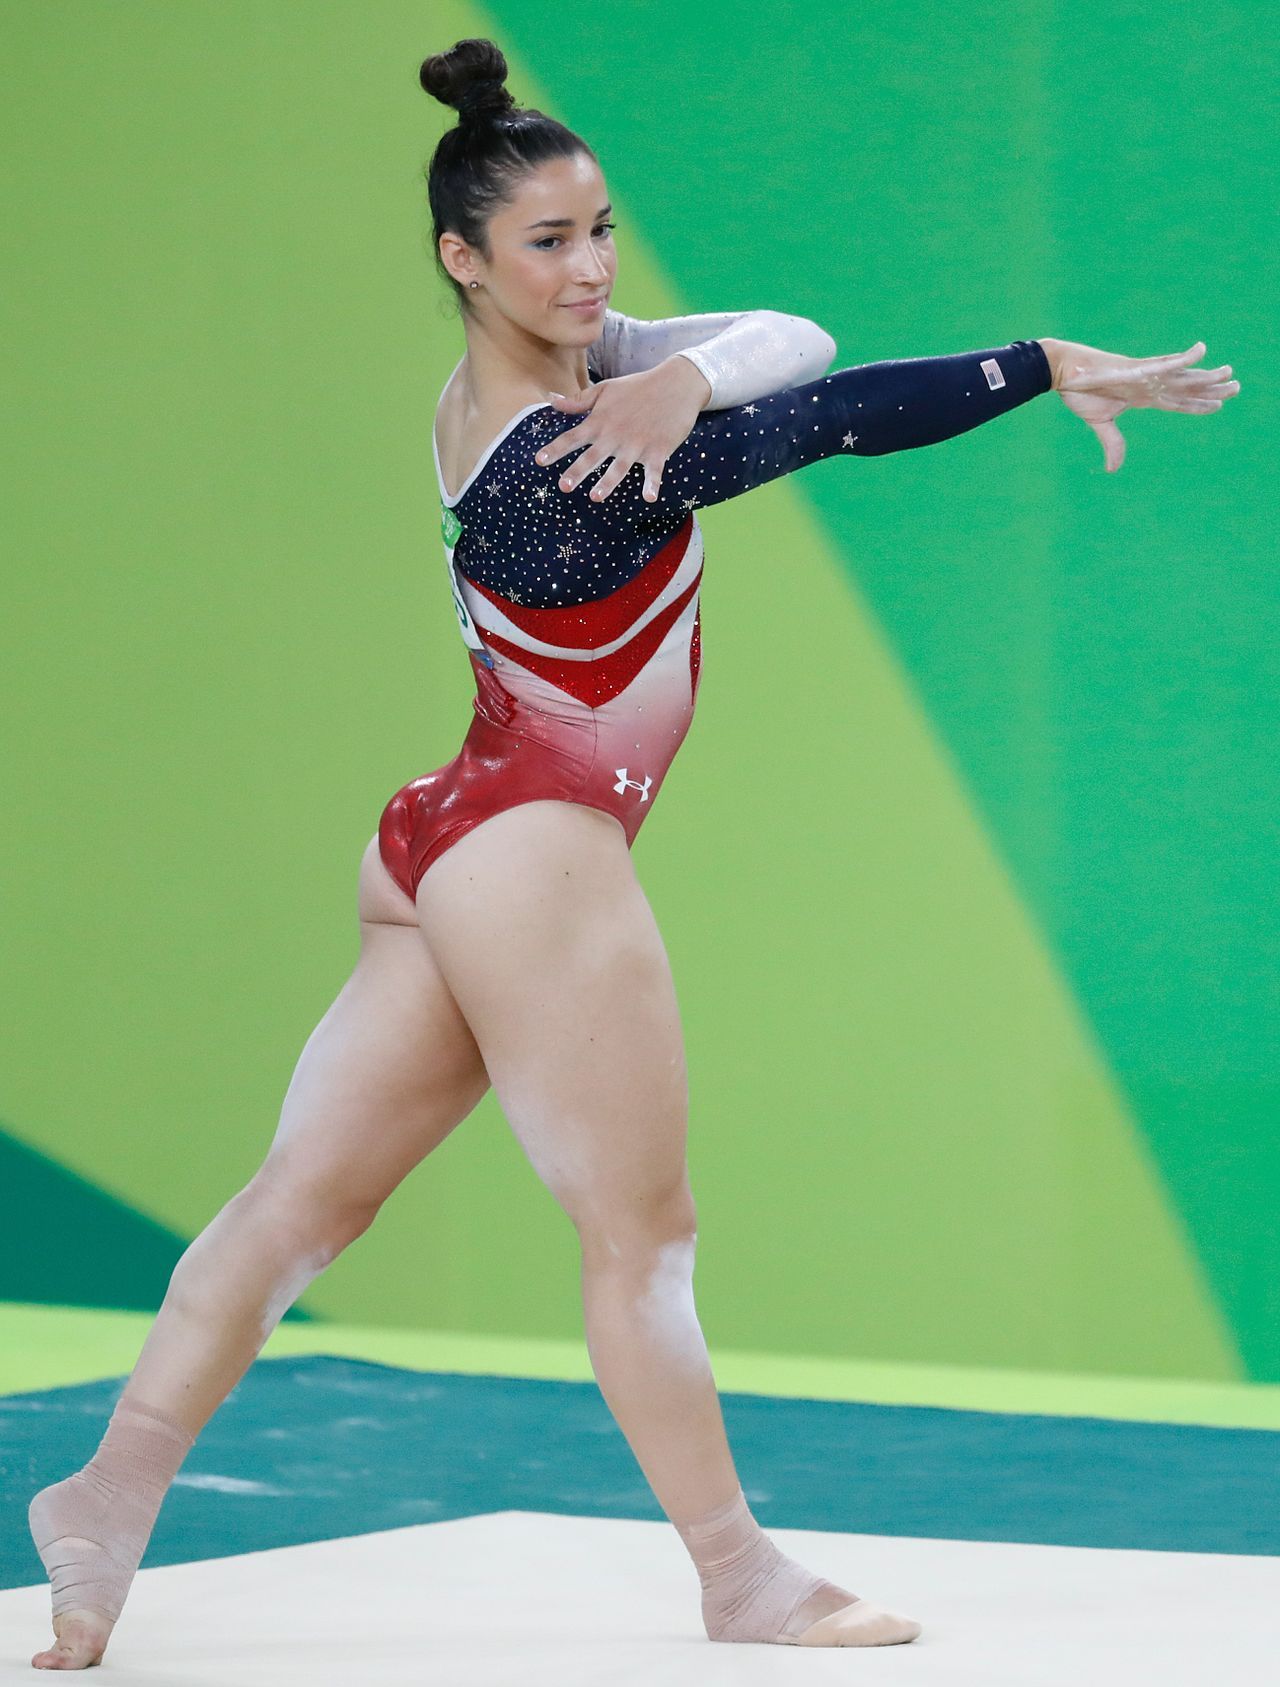 Aly Raisman pussy showing